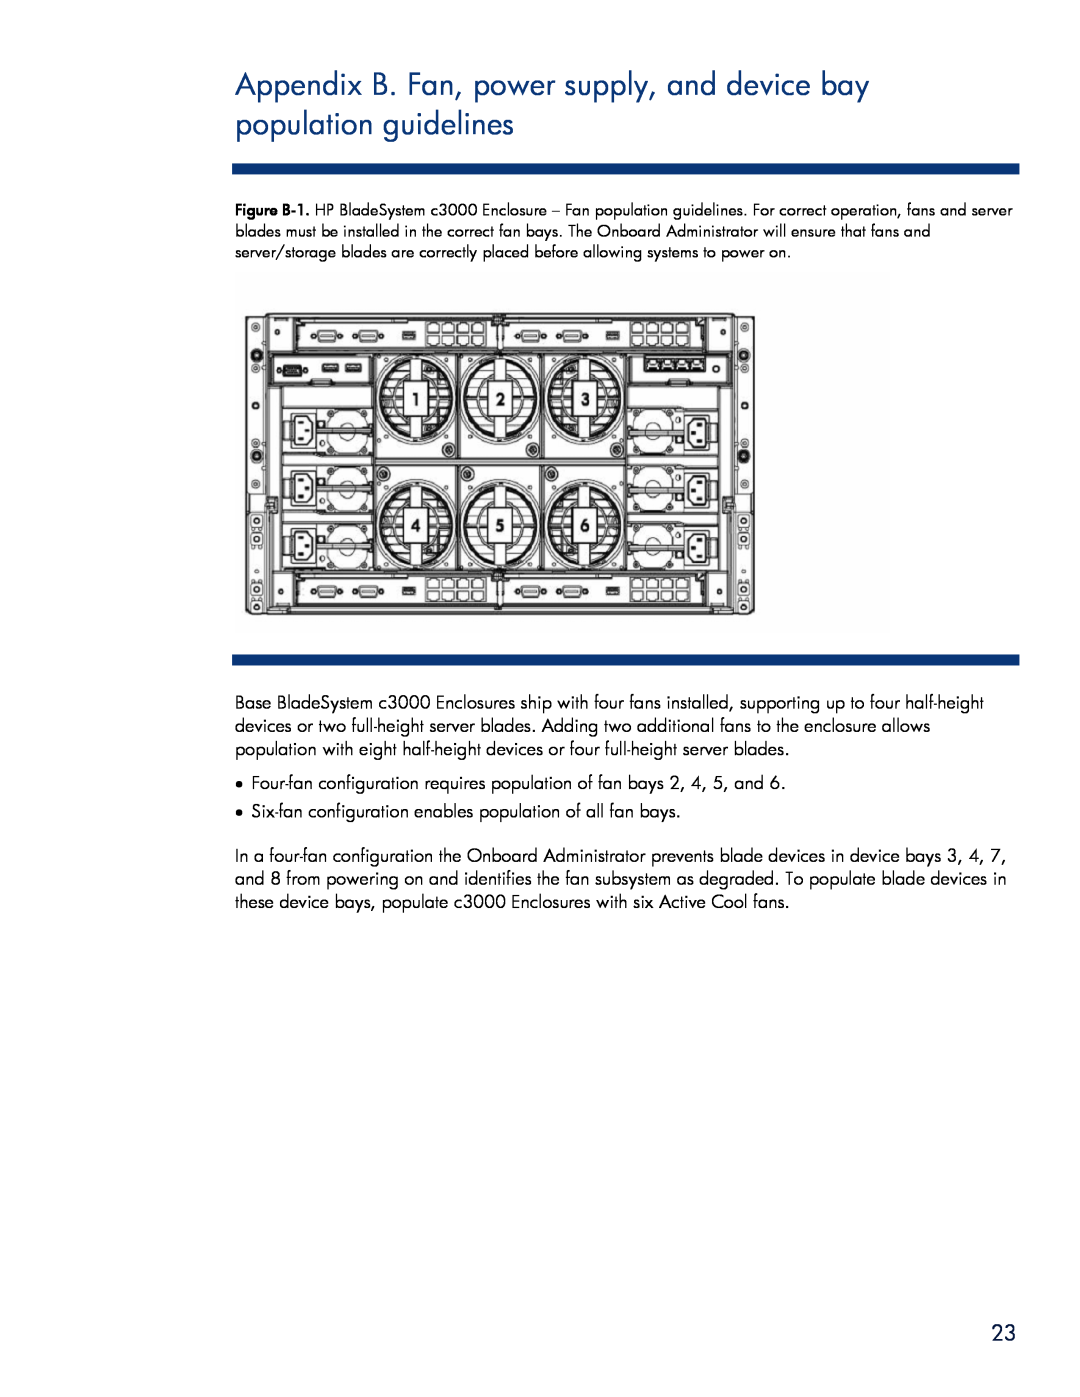 HP BladeSystem Enclosure technologies manual Appendix B. Fan, power supply, and device bay population guidelines 